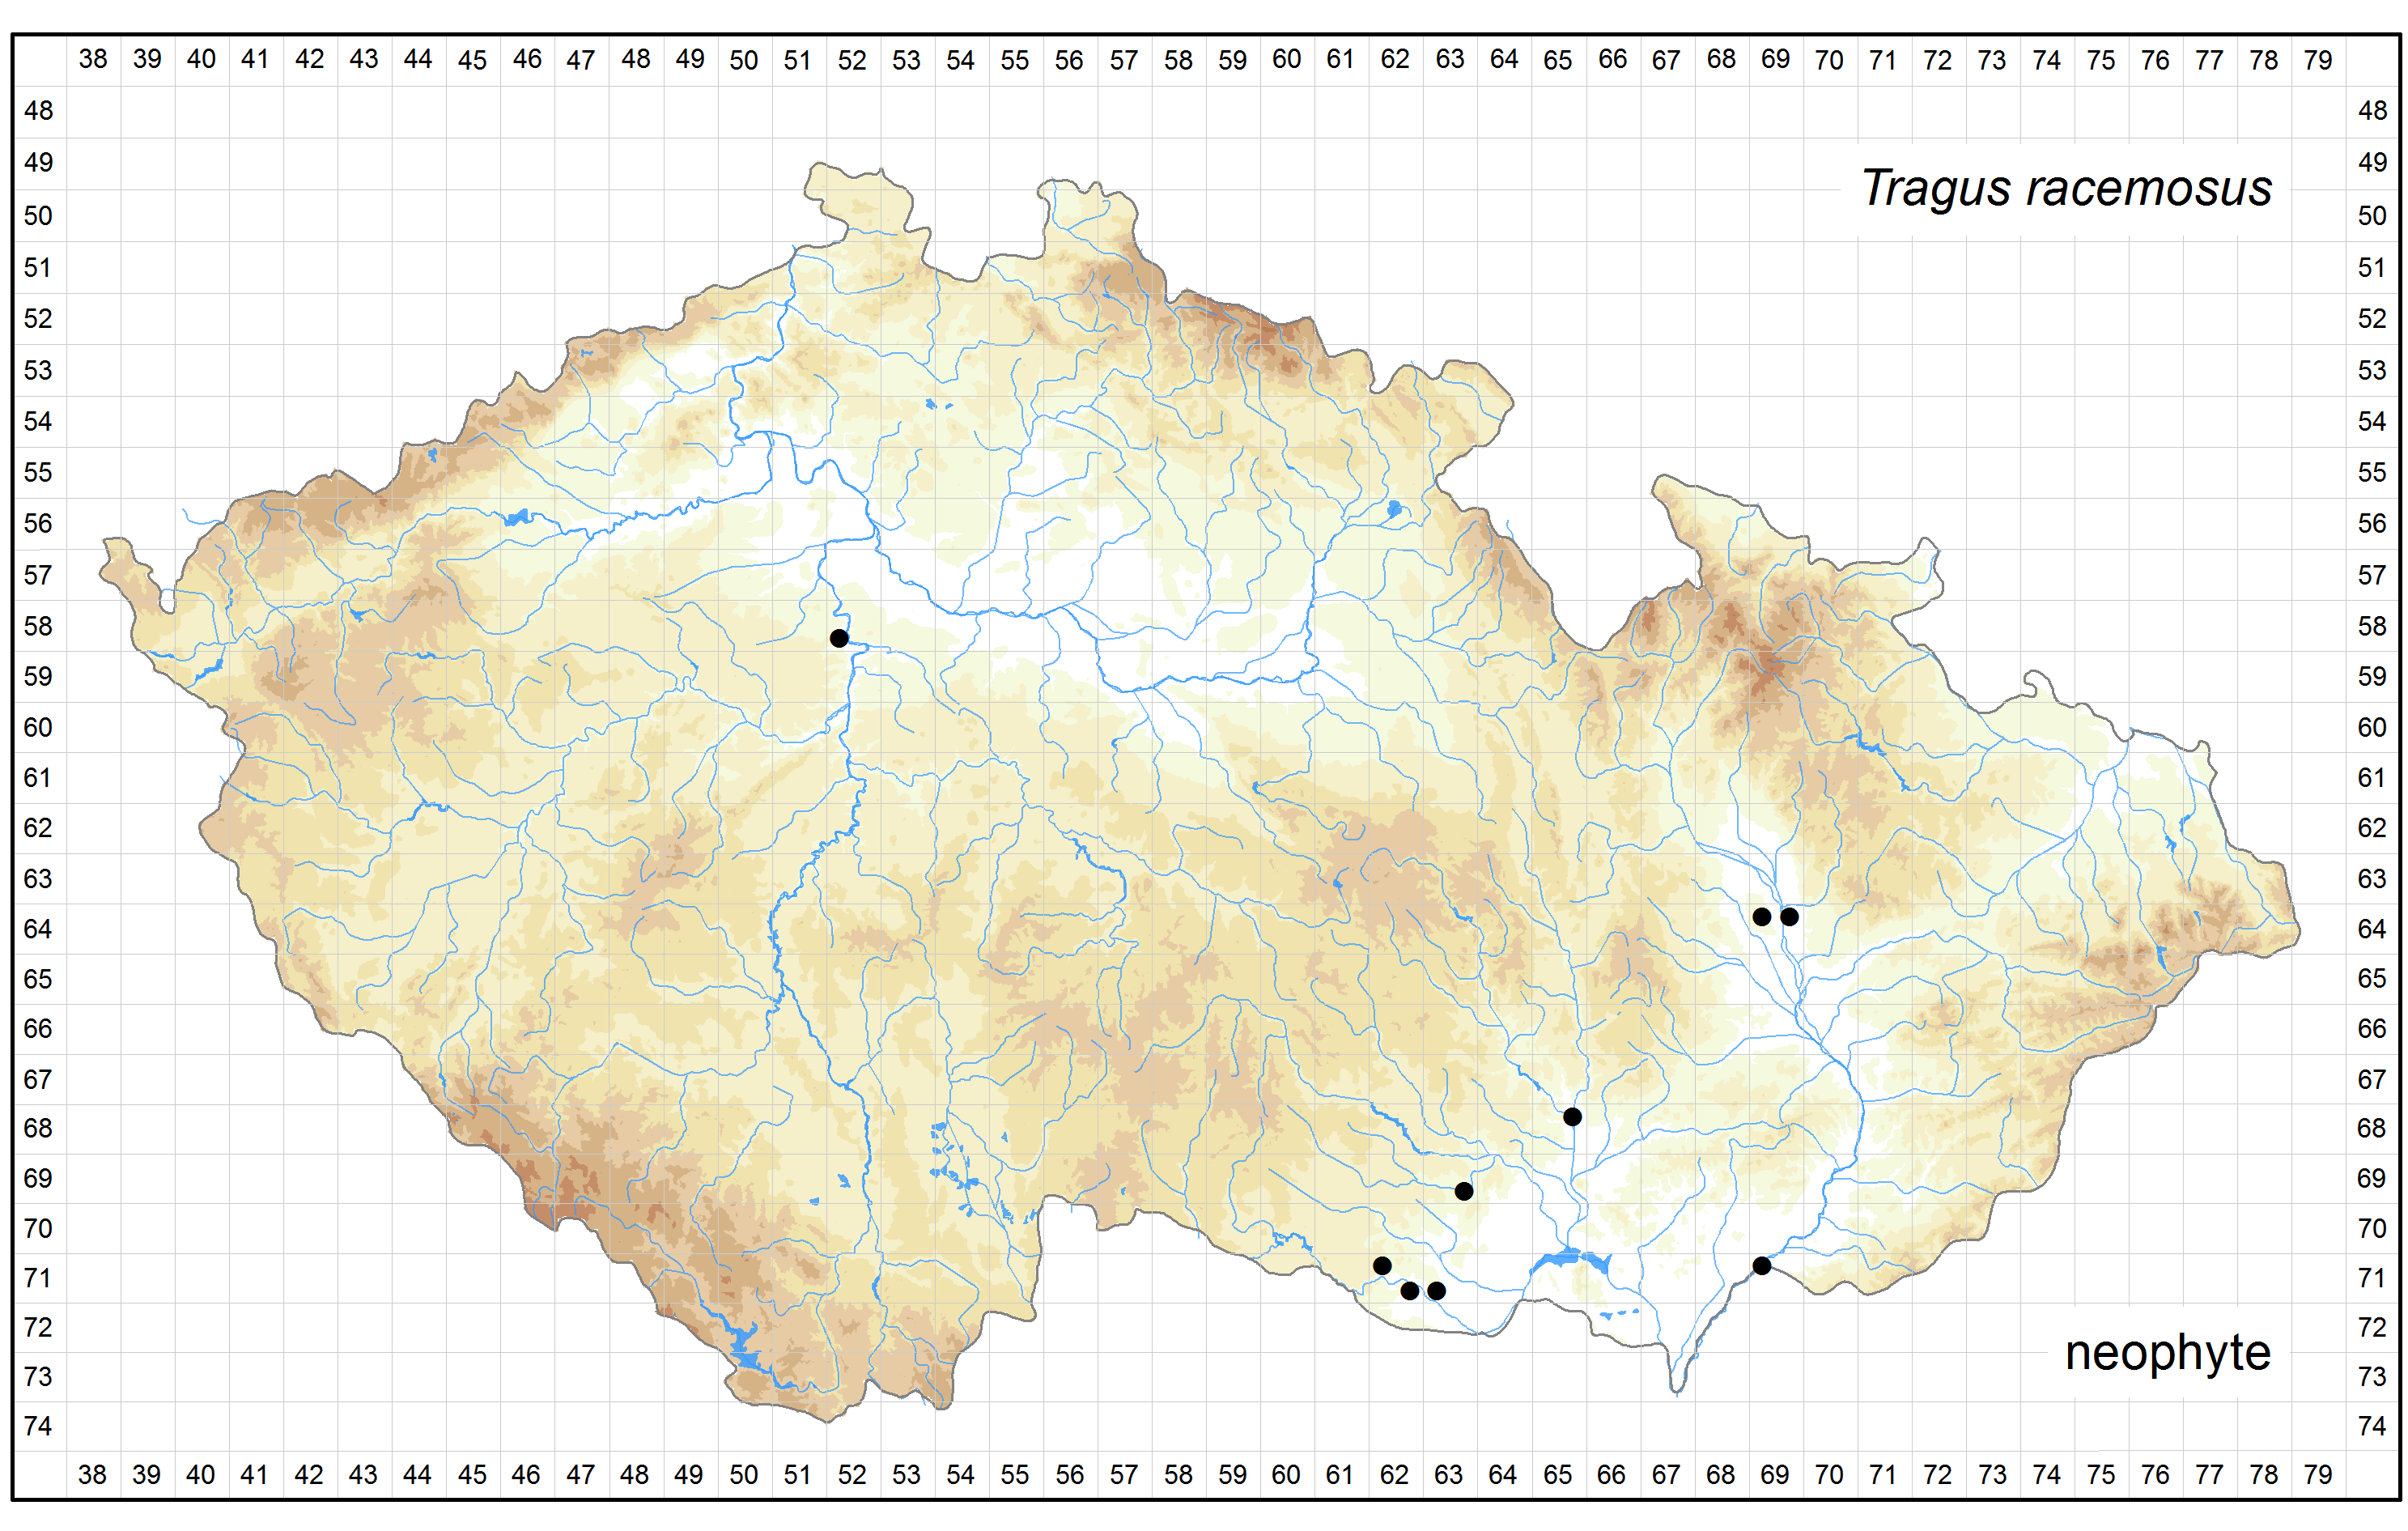 Distribution of Tragus racemosus in the Czech Republic Author of the map: Jiří Zázvorka Map produced on: 18-11-2015 Database records used for producing the distribution map of Tragus racemosus